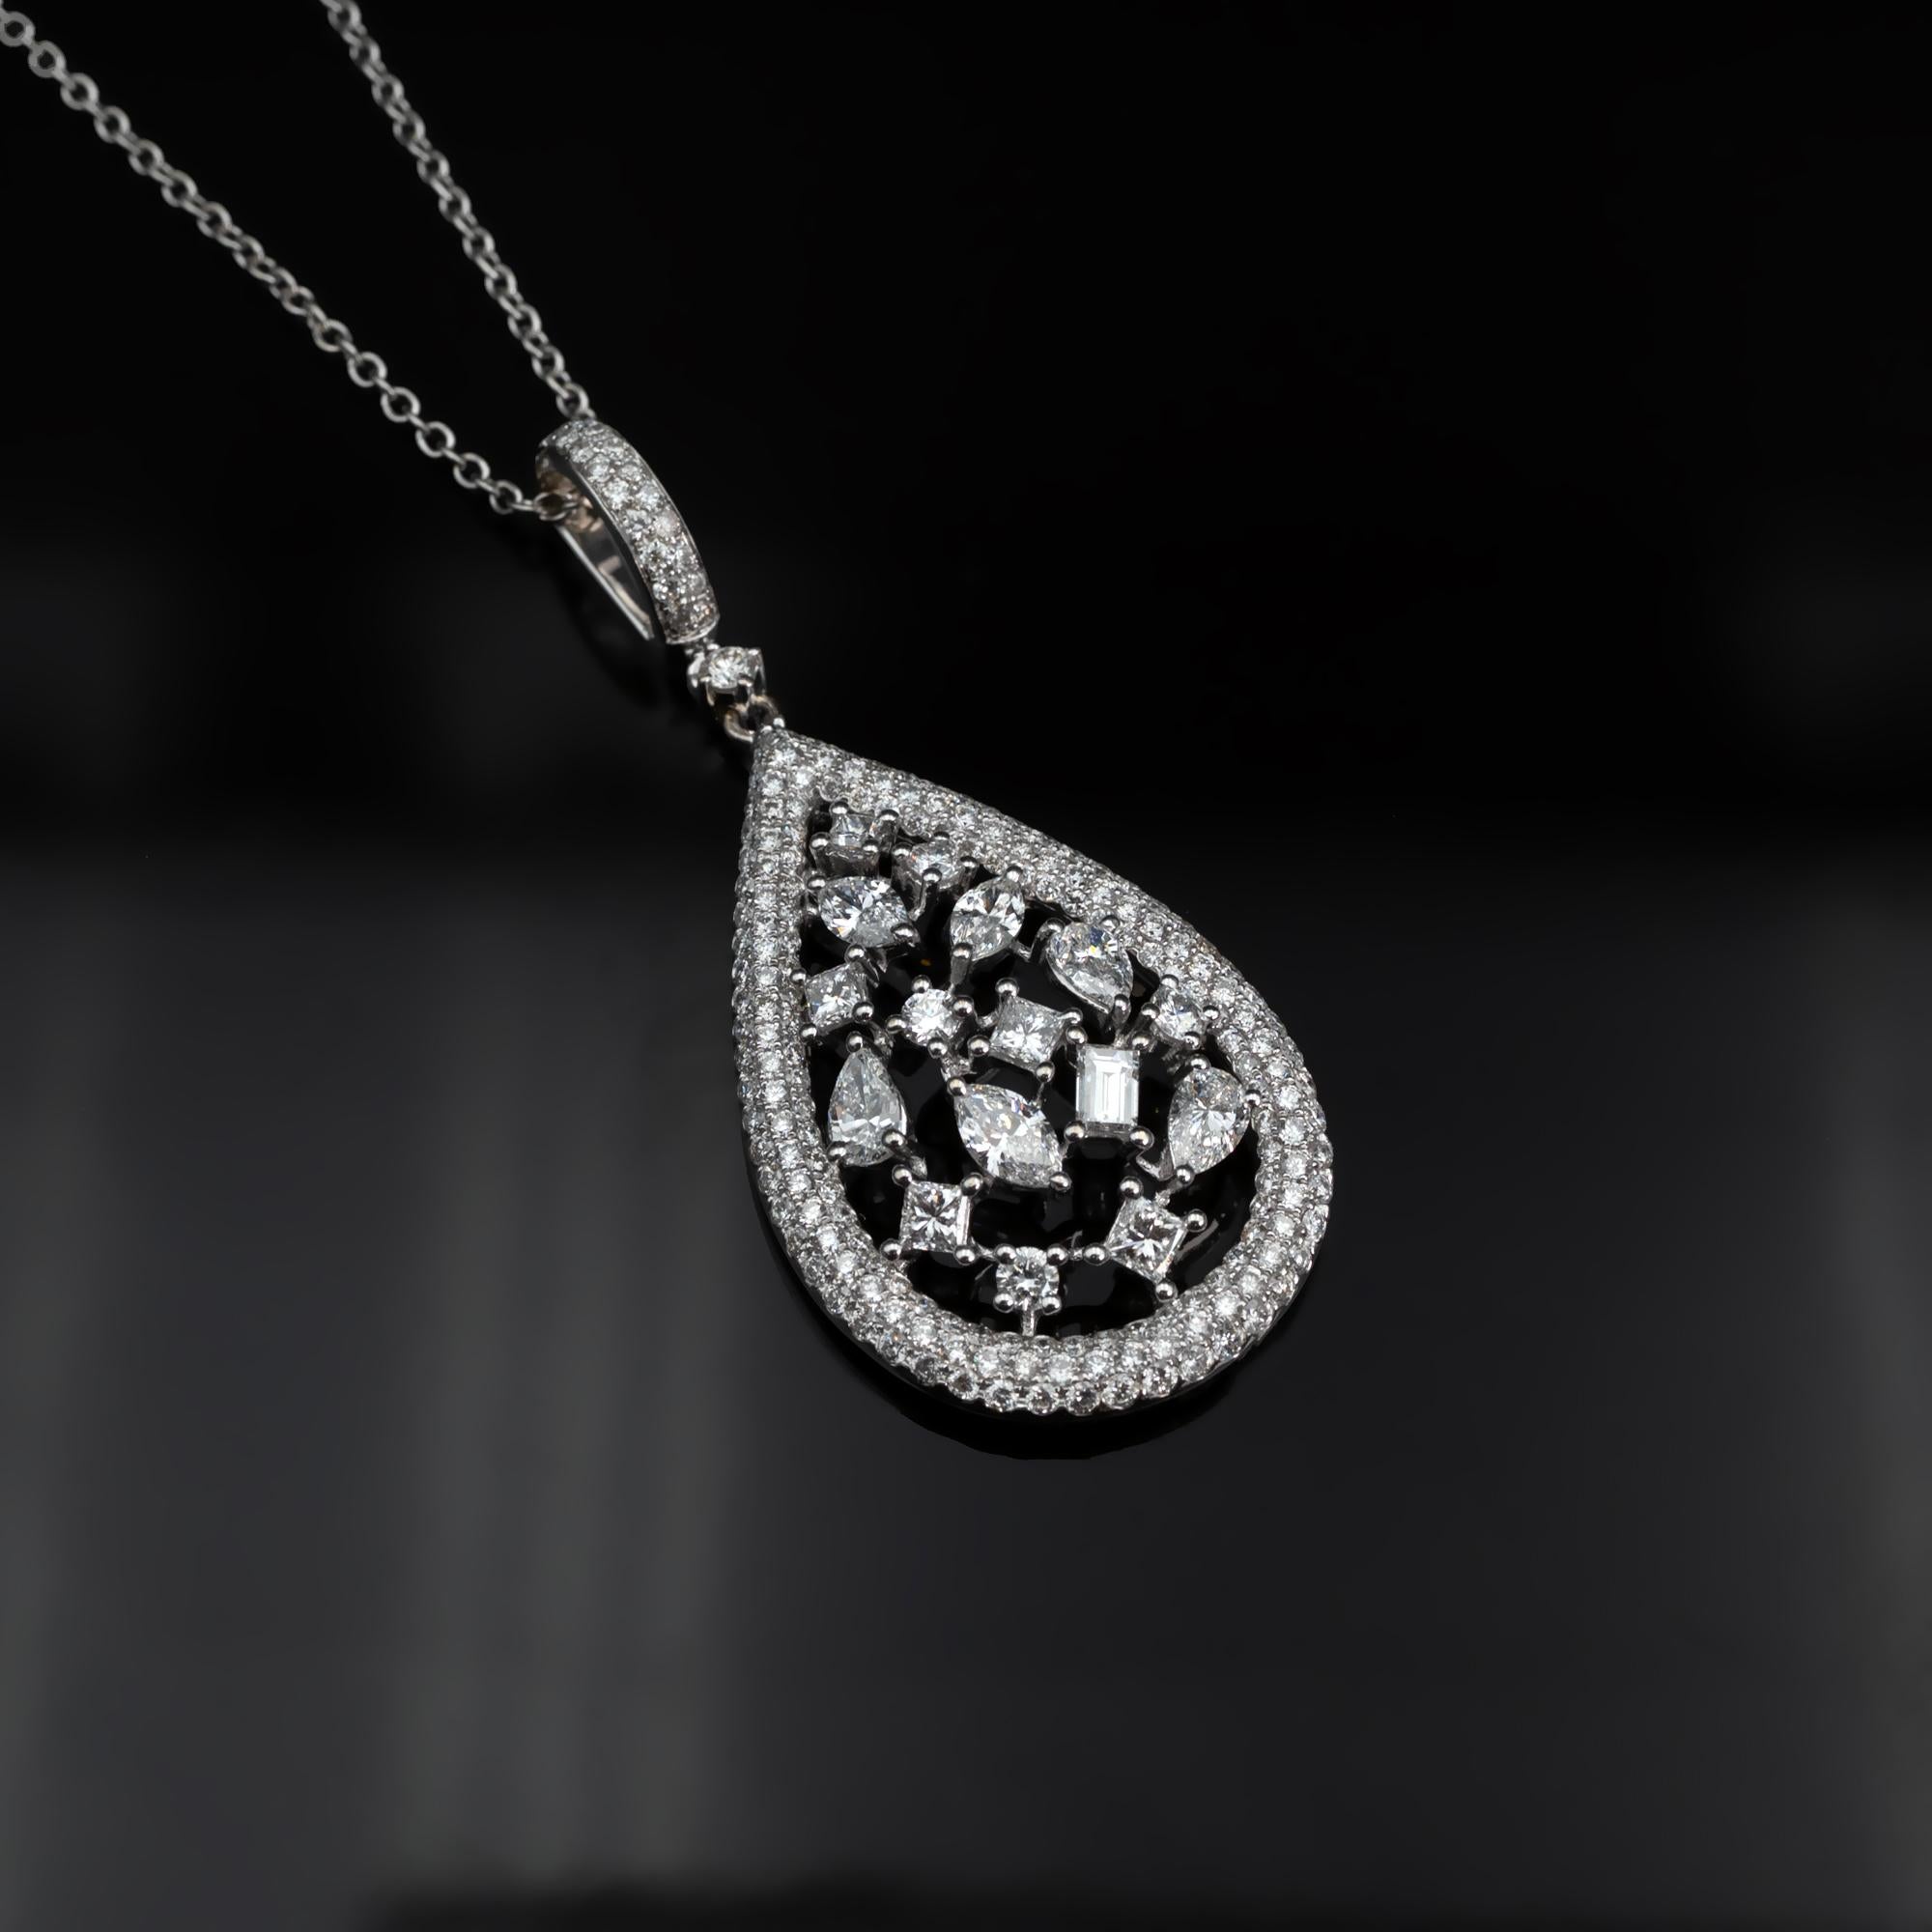 Lovely Pear-shaped Pendant necklace, consisting of a tightly pavé-set frame in the midst of which sixteen bigger diamonds are set ( round, marquise, baguette, princess and pear-shaped). 
The total weight of diamond is ± 2.65 carat
Measure of the